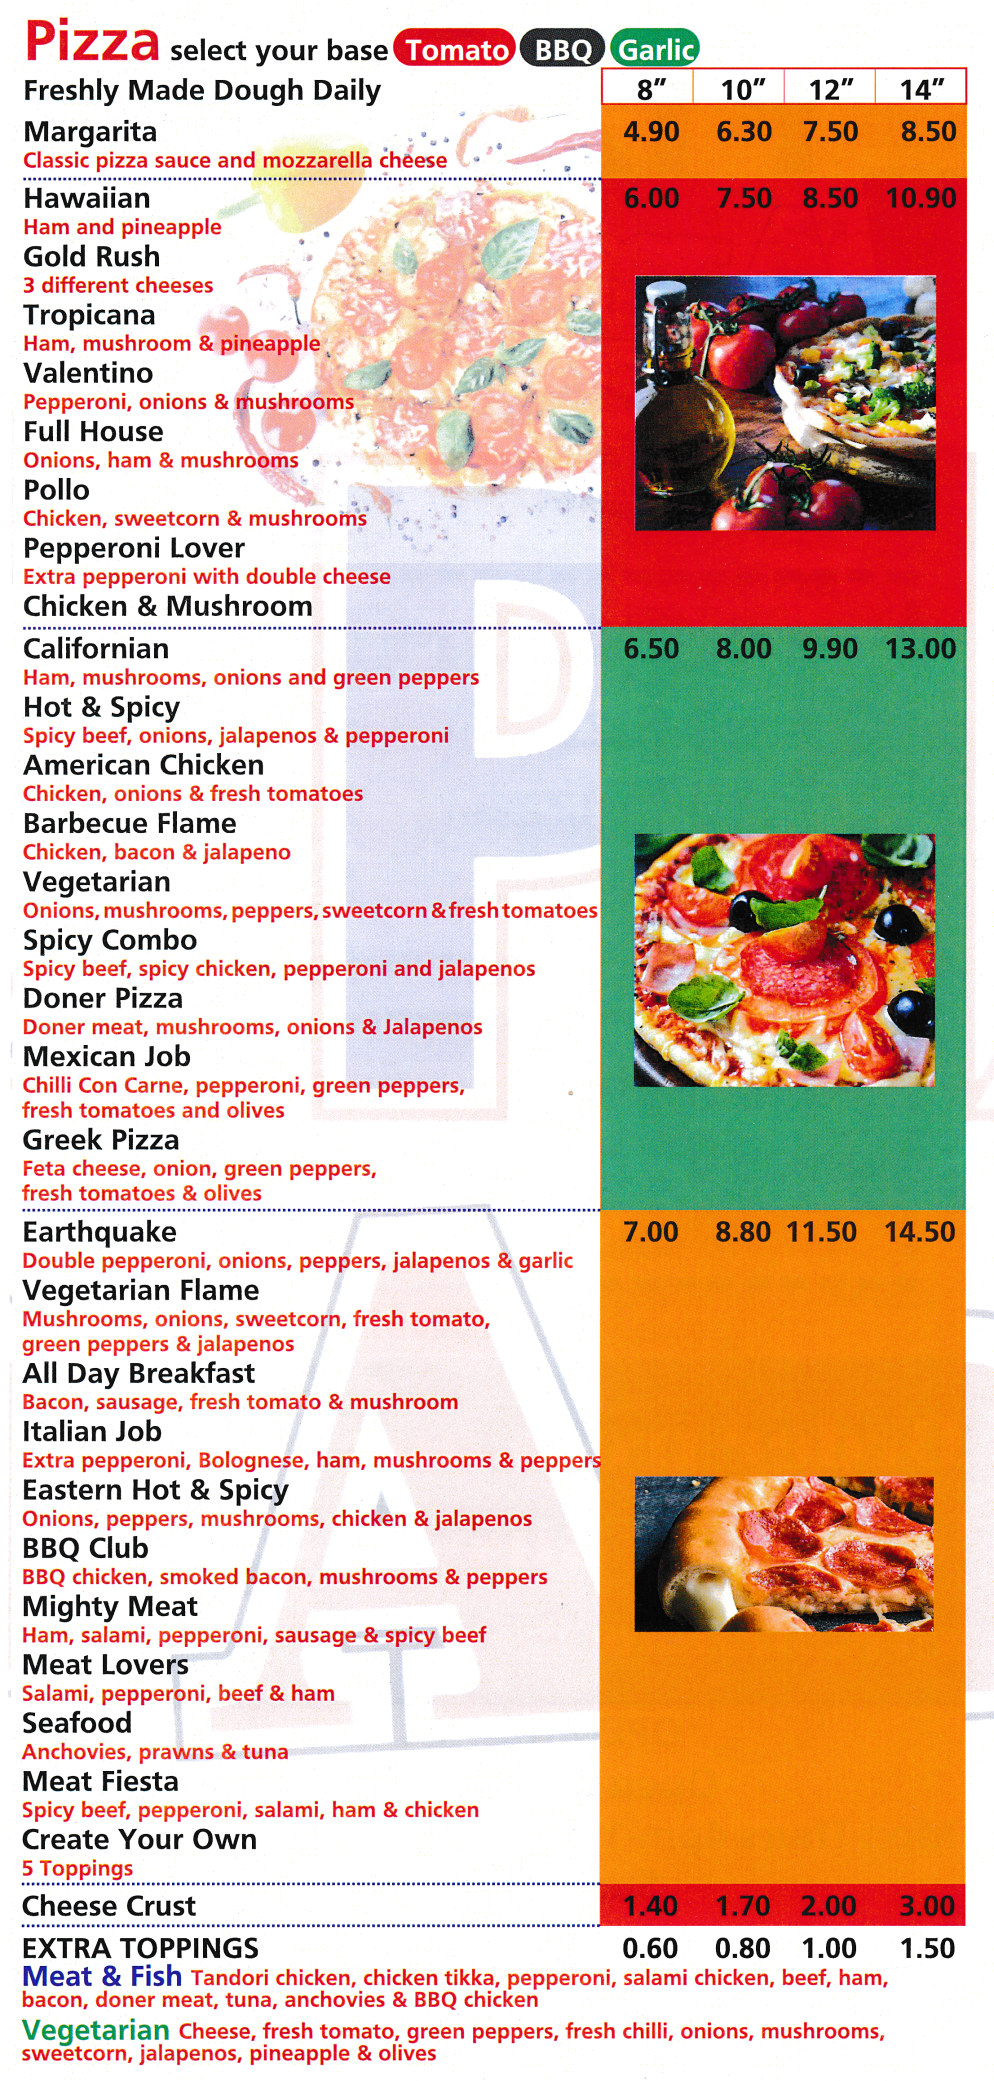 Menu for Pizza Amico's - Pizzas inlcluding Gold Rush, Tropicana, Full House, Pollo, Barbeque Flame, Spicy Combo, Doner Pizza, Mexican Job, Hot & Spicy, Mighty Meat..